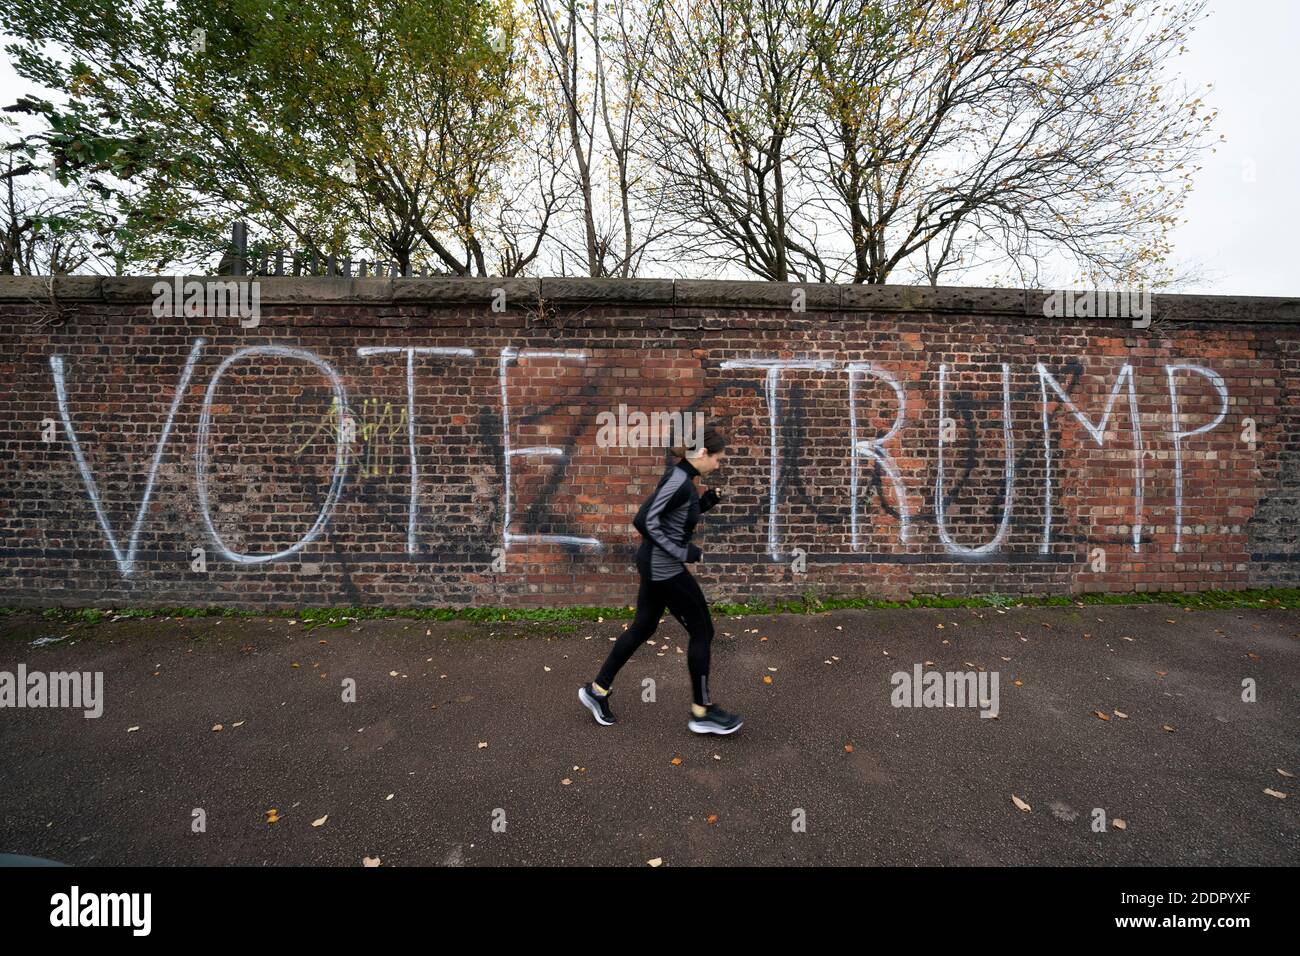 Manchester, UK. 26th November, 2020. Vote Trump graffiti is seen on a wall in Manchester, UK. Credit: Jon Super/Alamy Live News. Stock Photo